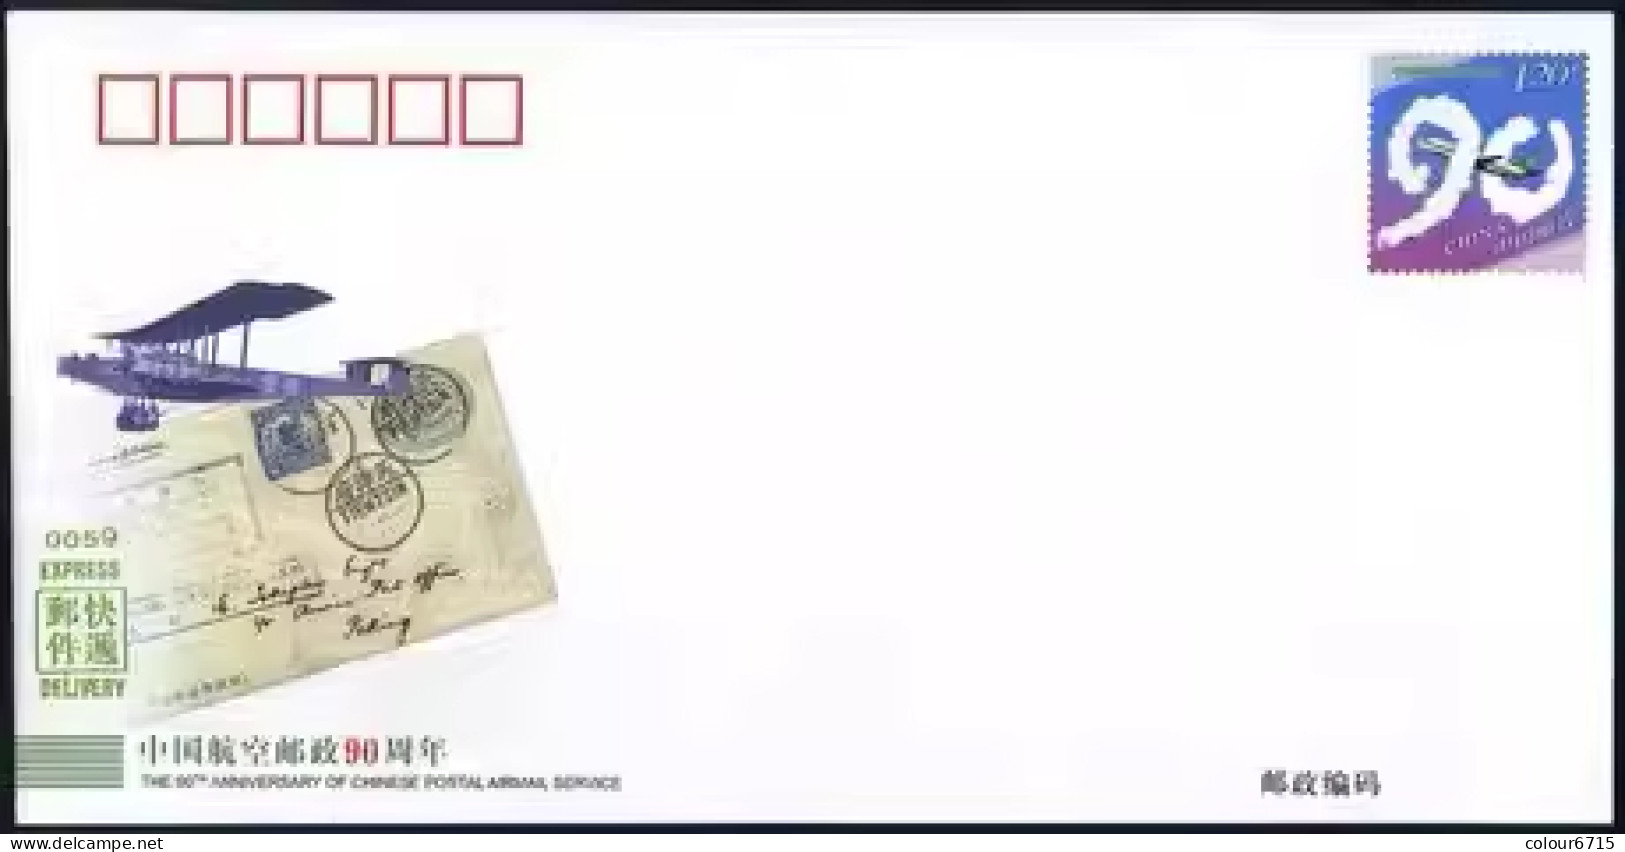 China Postal Cover 2010/JF94 The 90th Anniversary Of Chinese Postal Airmail Service 1v MNH - Covers